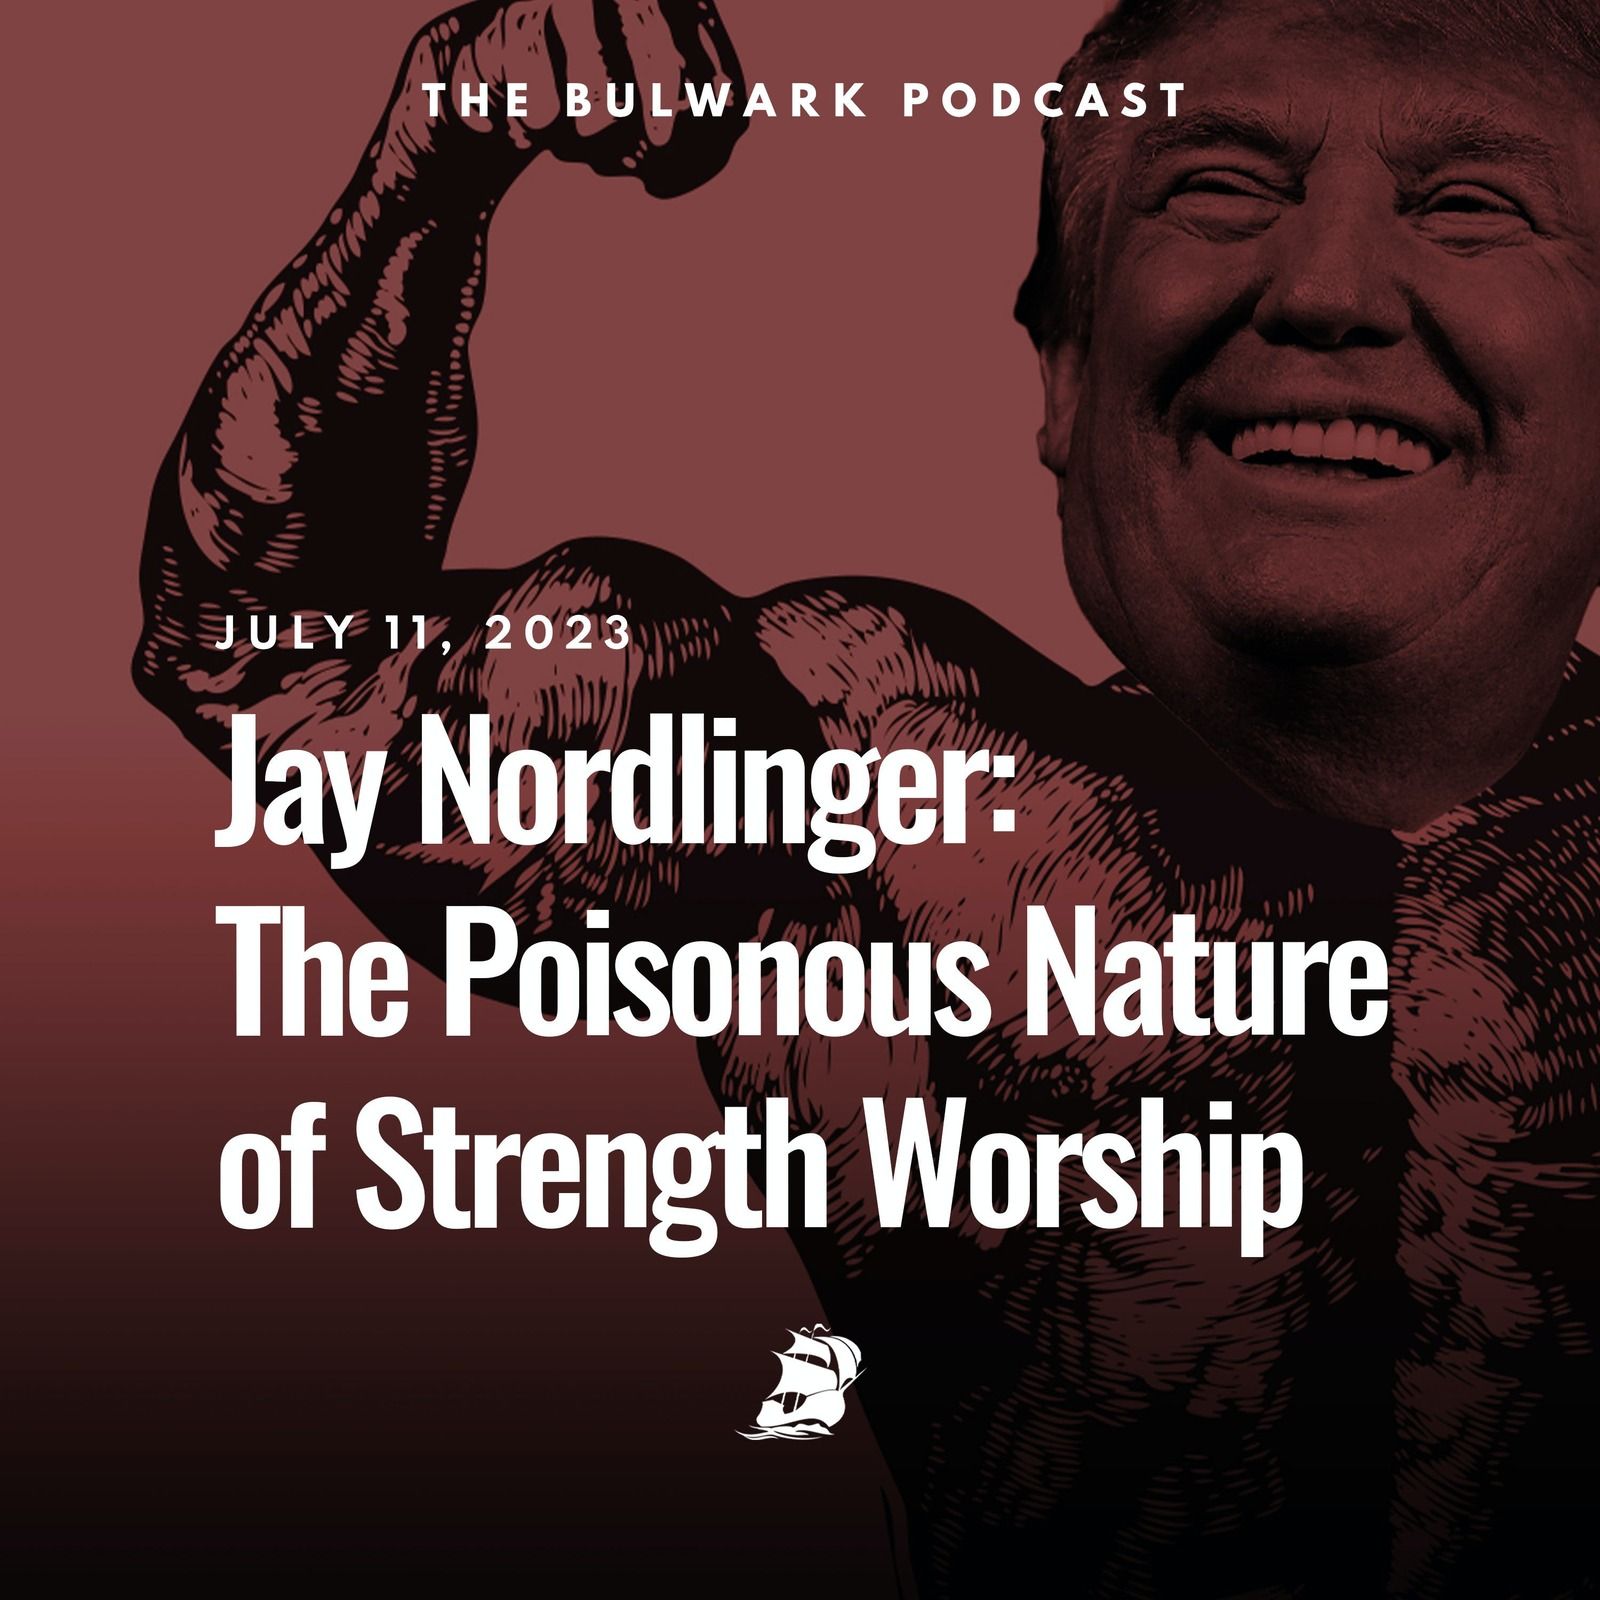 Jay Nordlinger: The Poisonous Nature of Strength Worship